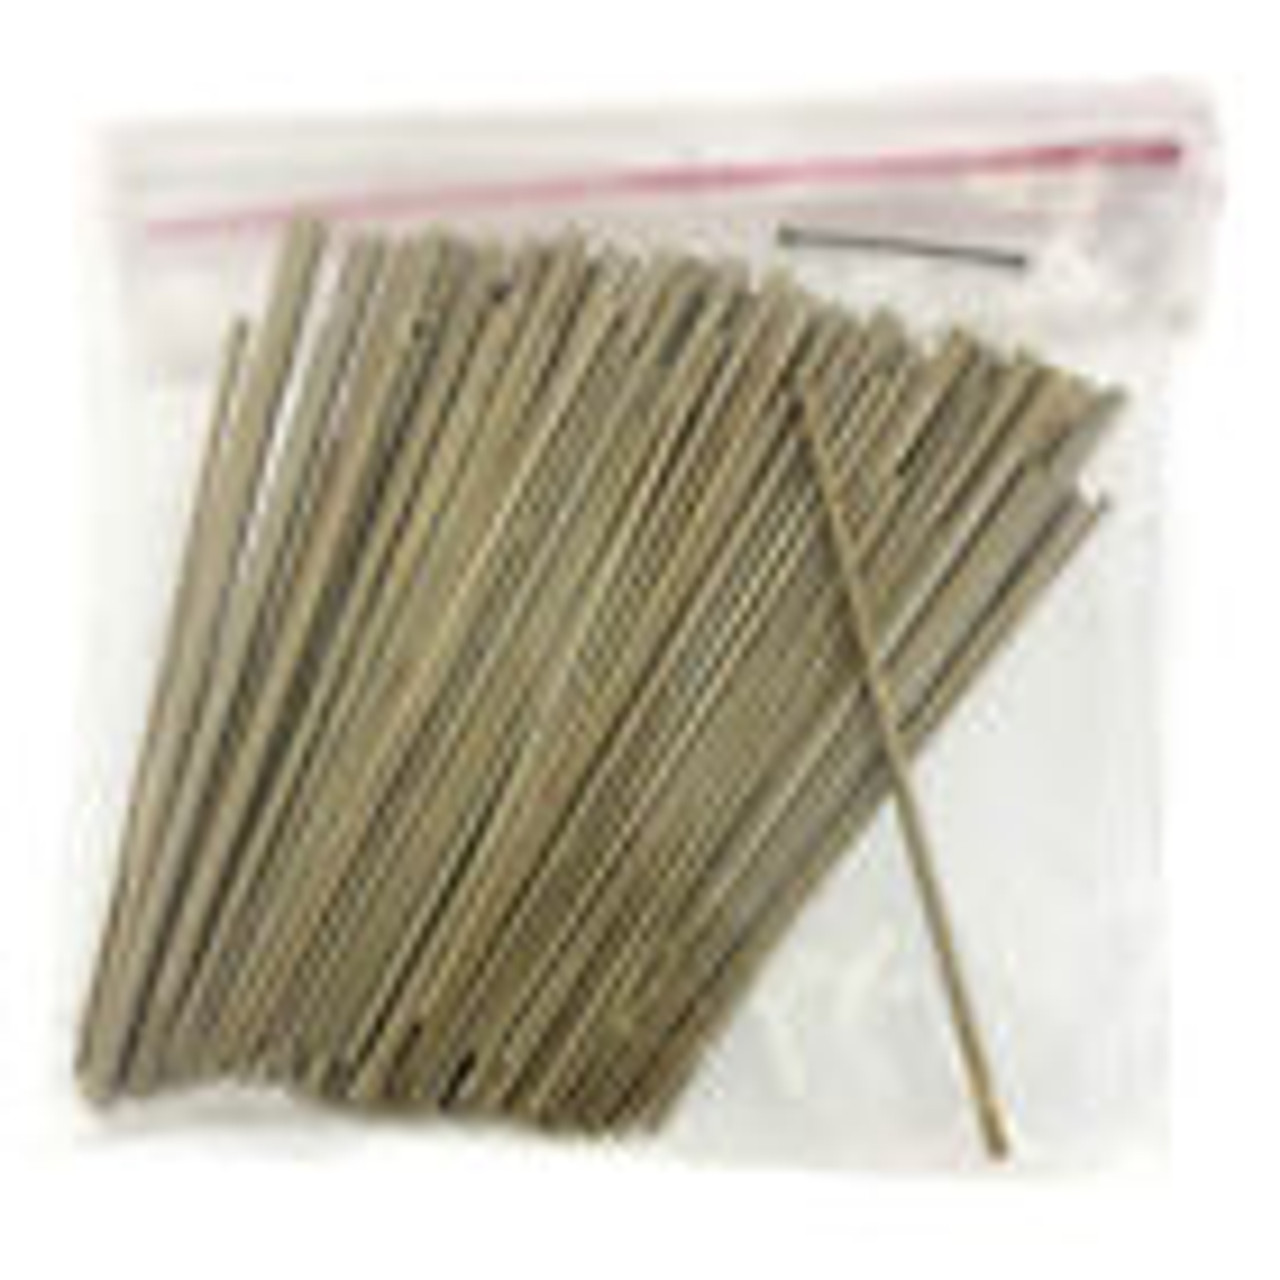 Tapered Pins for Watch Bands Repair - 100 Assorted Steel Brass Pins